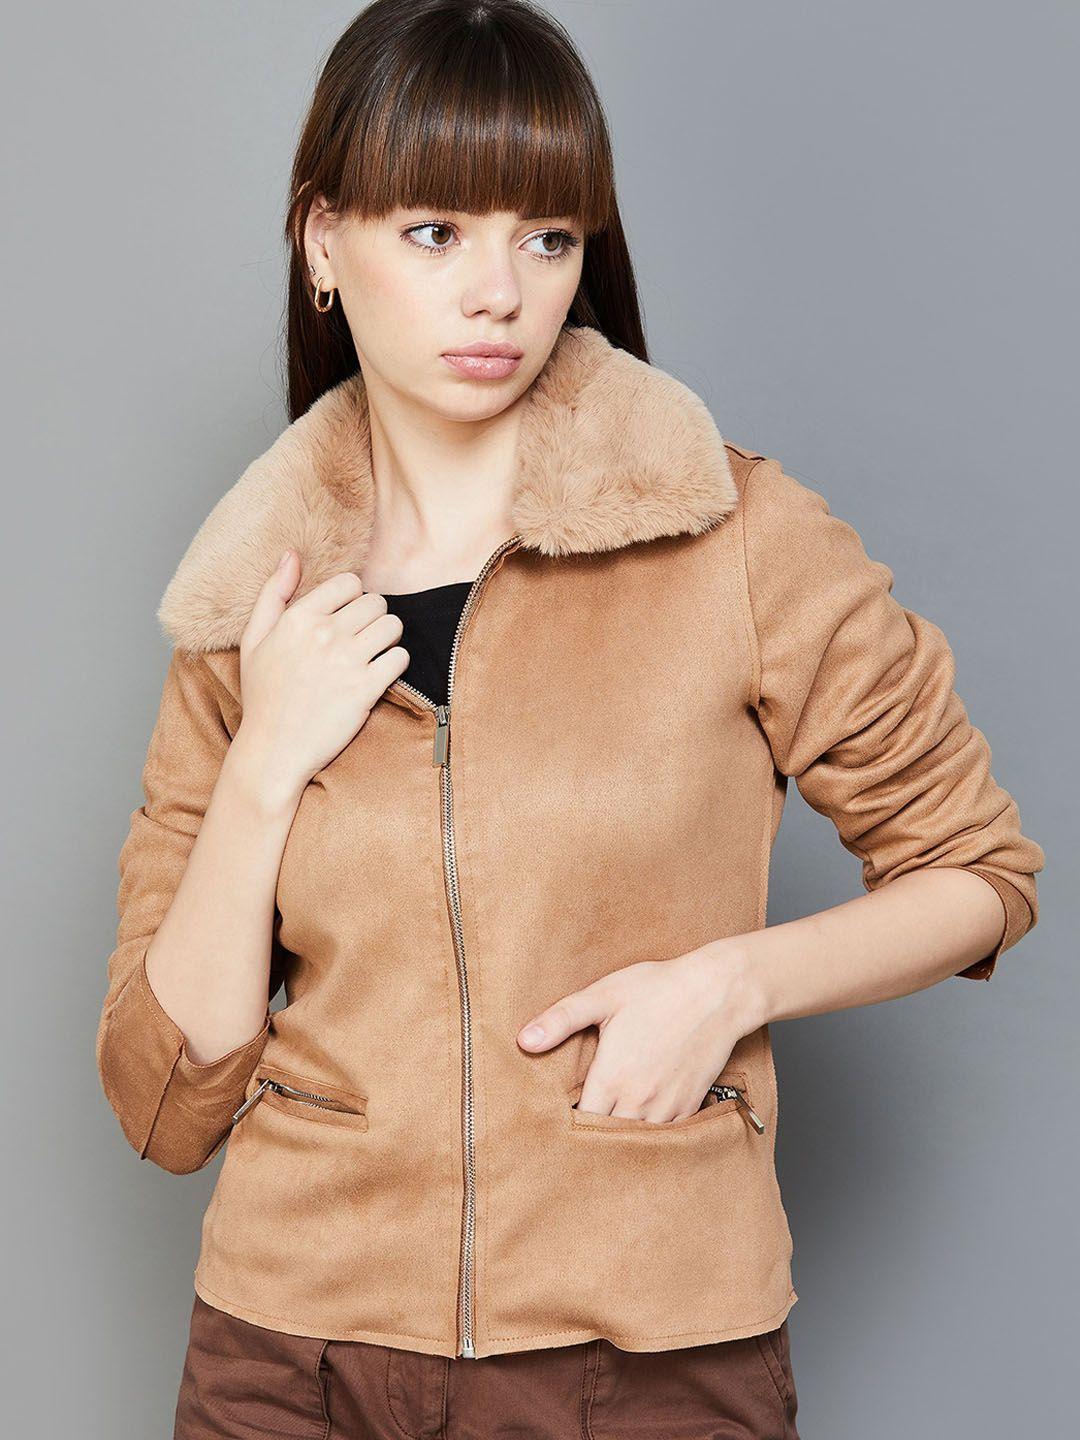 ginger by lifestyle spread collar tailored jacket